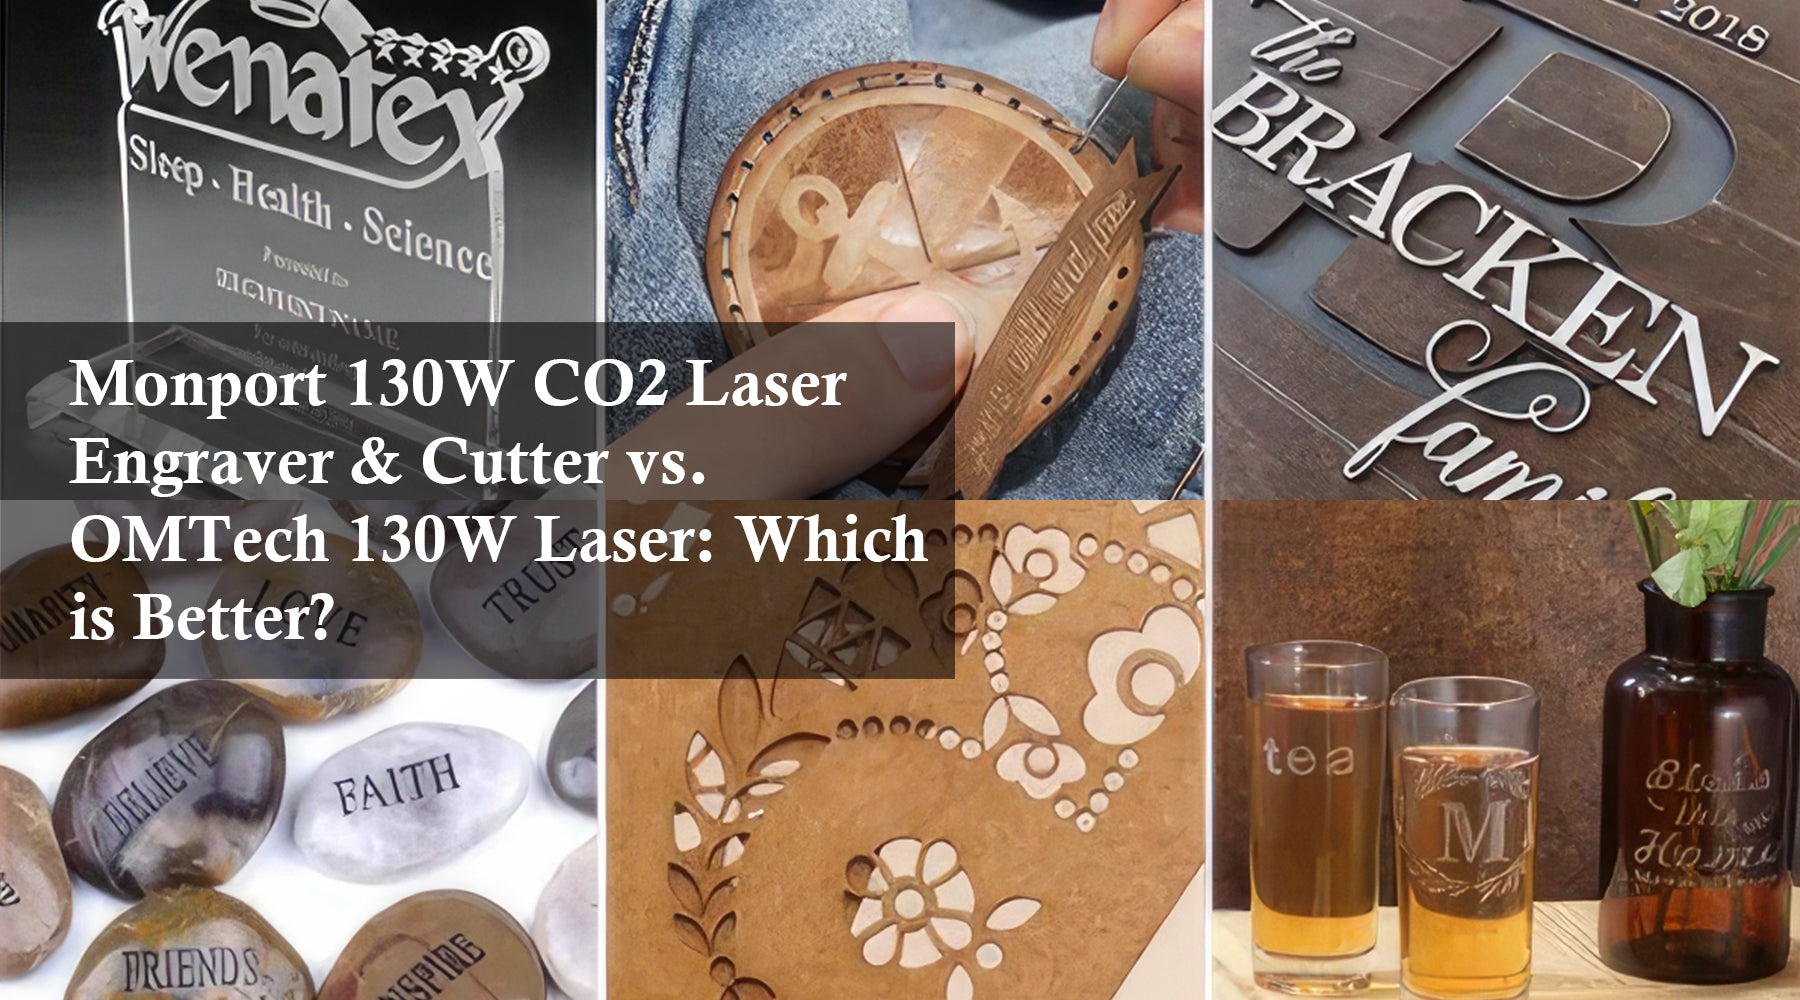 Monport 130W CO2 Laser Engraver & Cutter vs. OMTech 130W Laser: Which is Better?